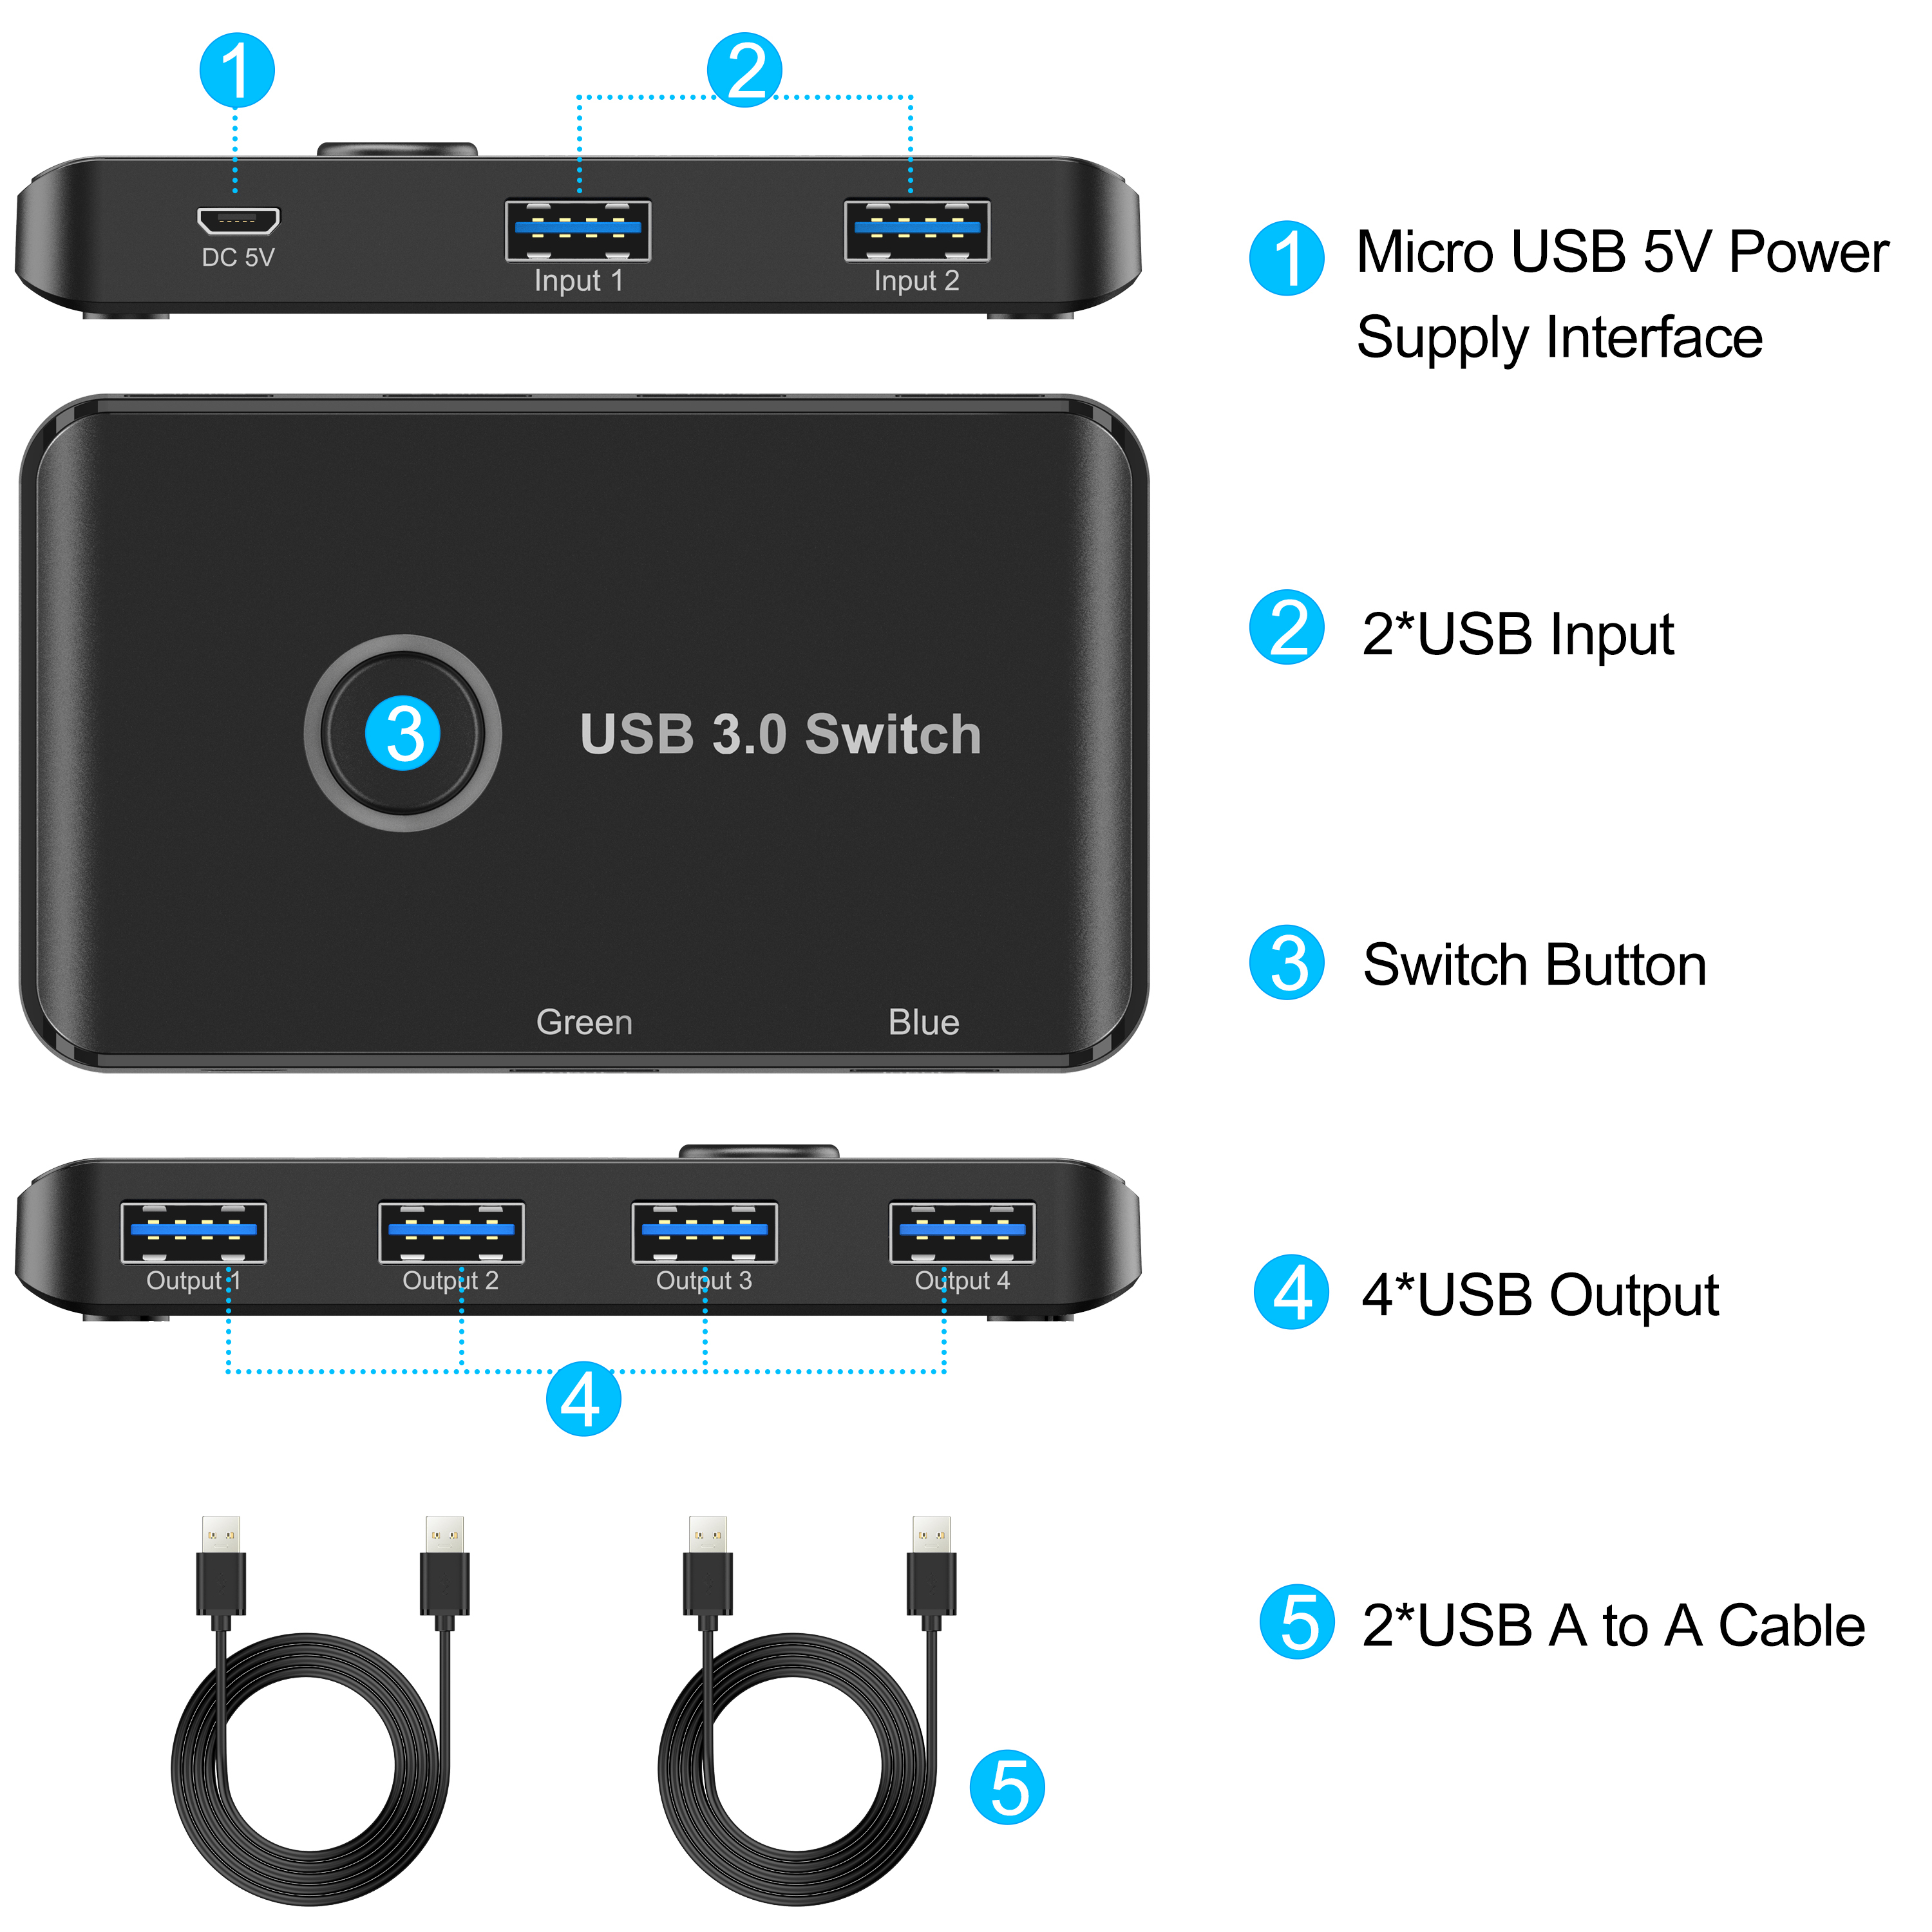 KCEVE USB 3.0 Switcher 2 Computers Share 4 USB Devices for PC Printer Scanner Mouse Keyboard with One Button Switch and 2 Pack USB Cable USB Switch Selector 4 Ports Compatible with Mac/Windows/Linux 